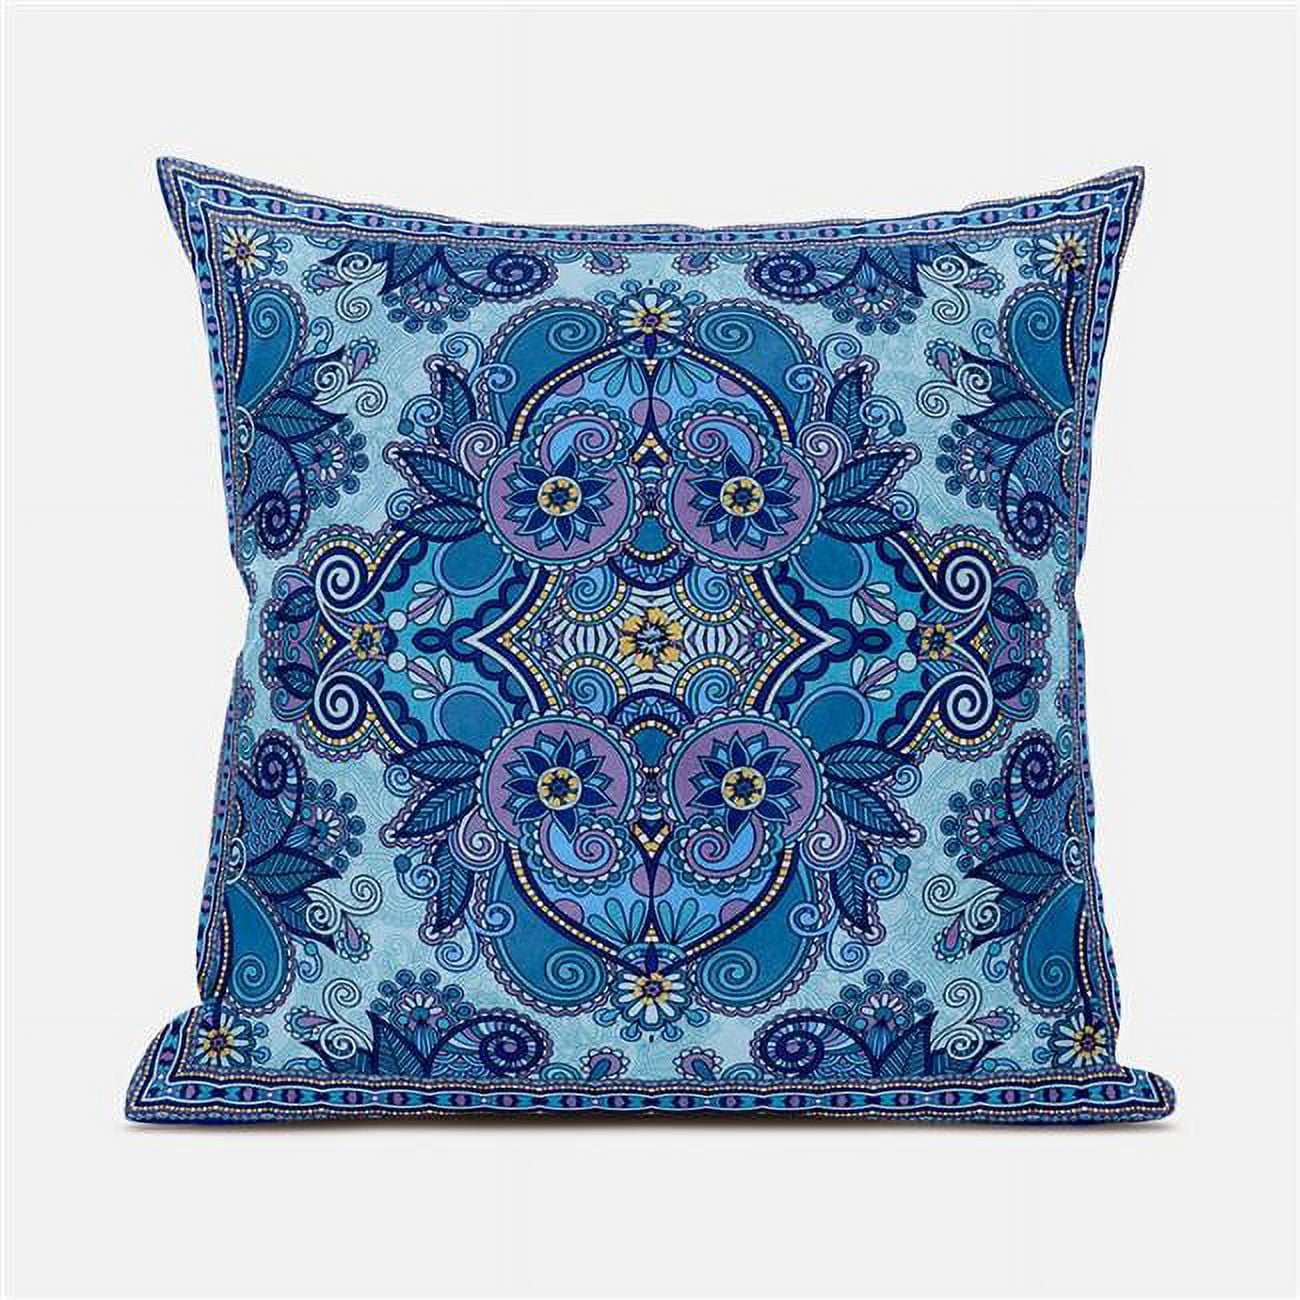 Picture of Amrita Sen Designs CAPL1004FSDS-ZP-20x20 20 x 20 in. Floral Paisley Suede Zippered Pillow with Insert - Blue & Purple